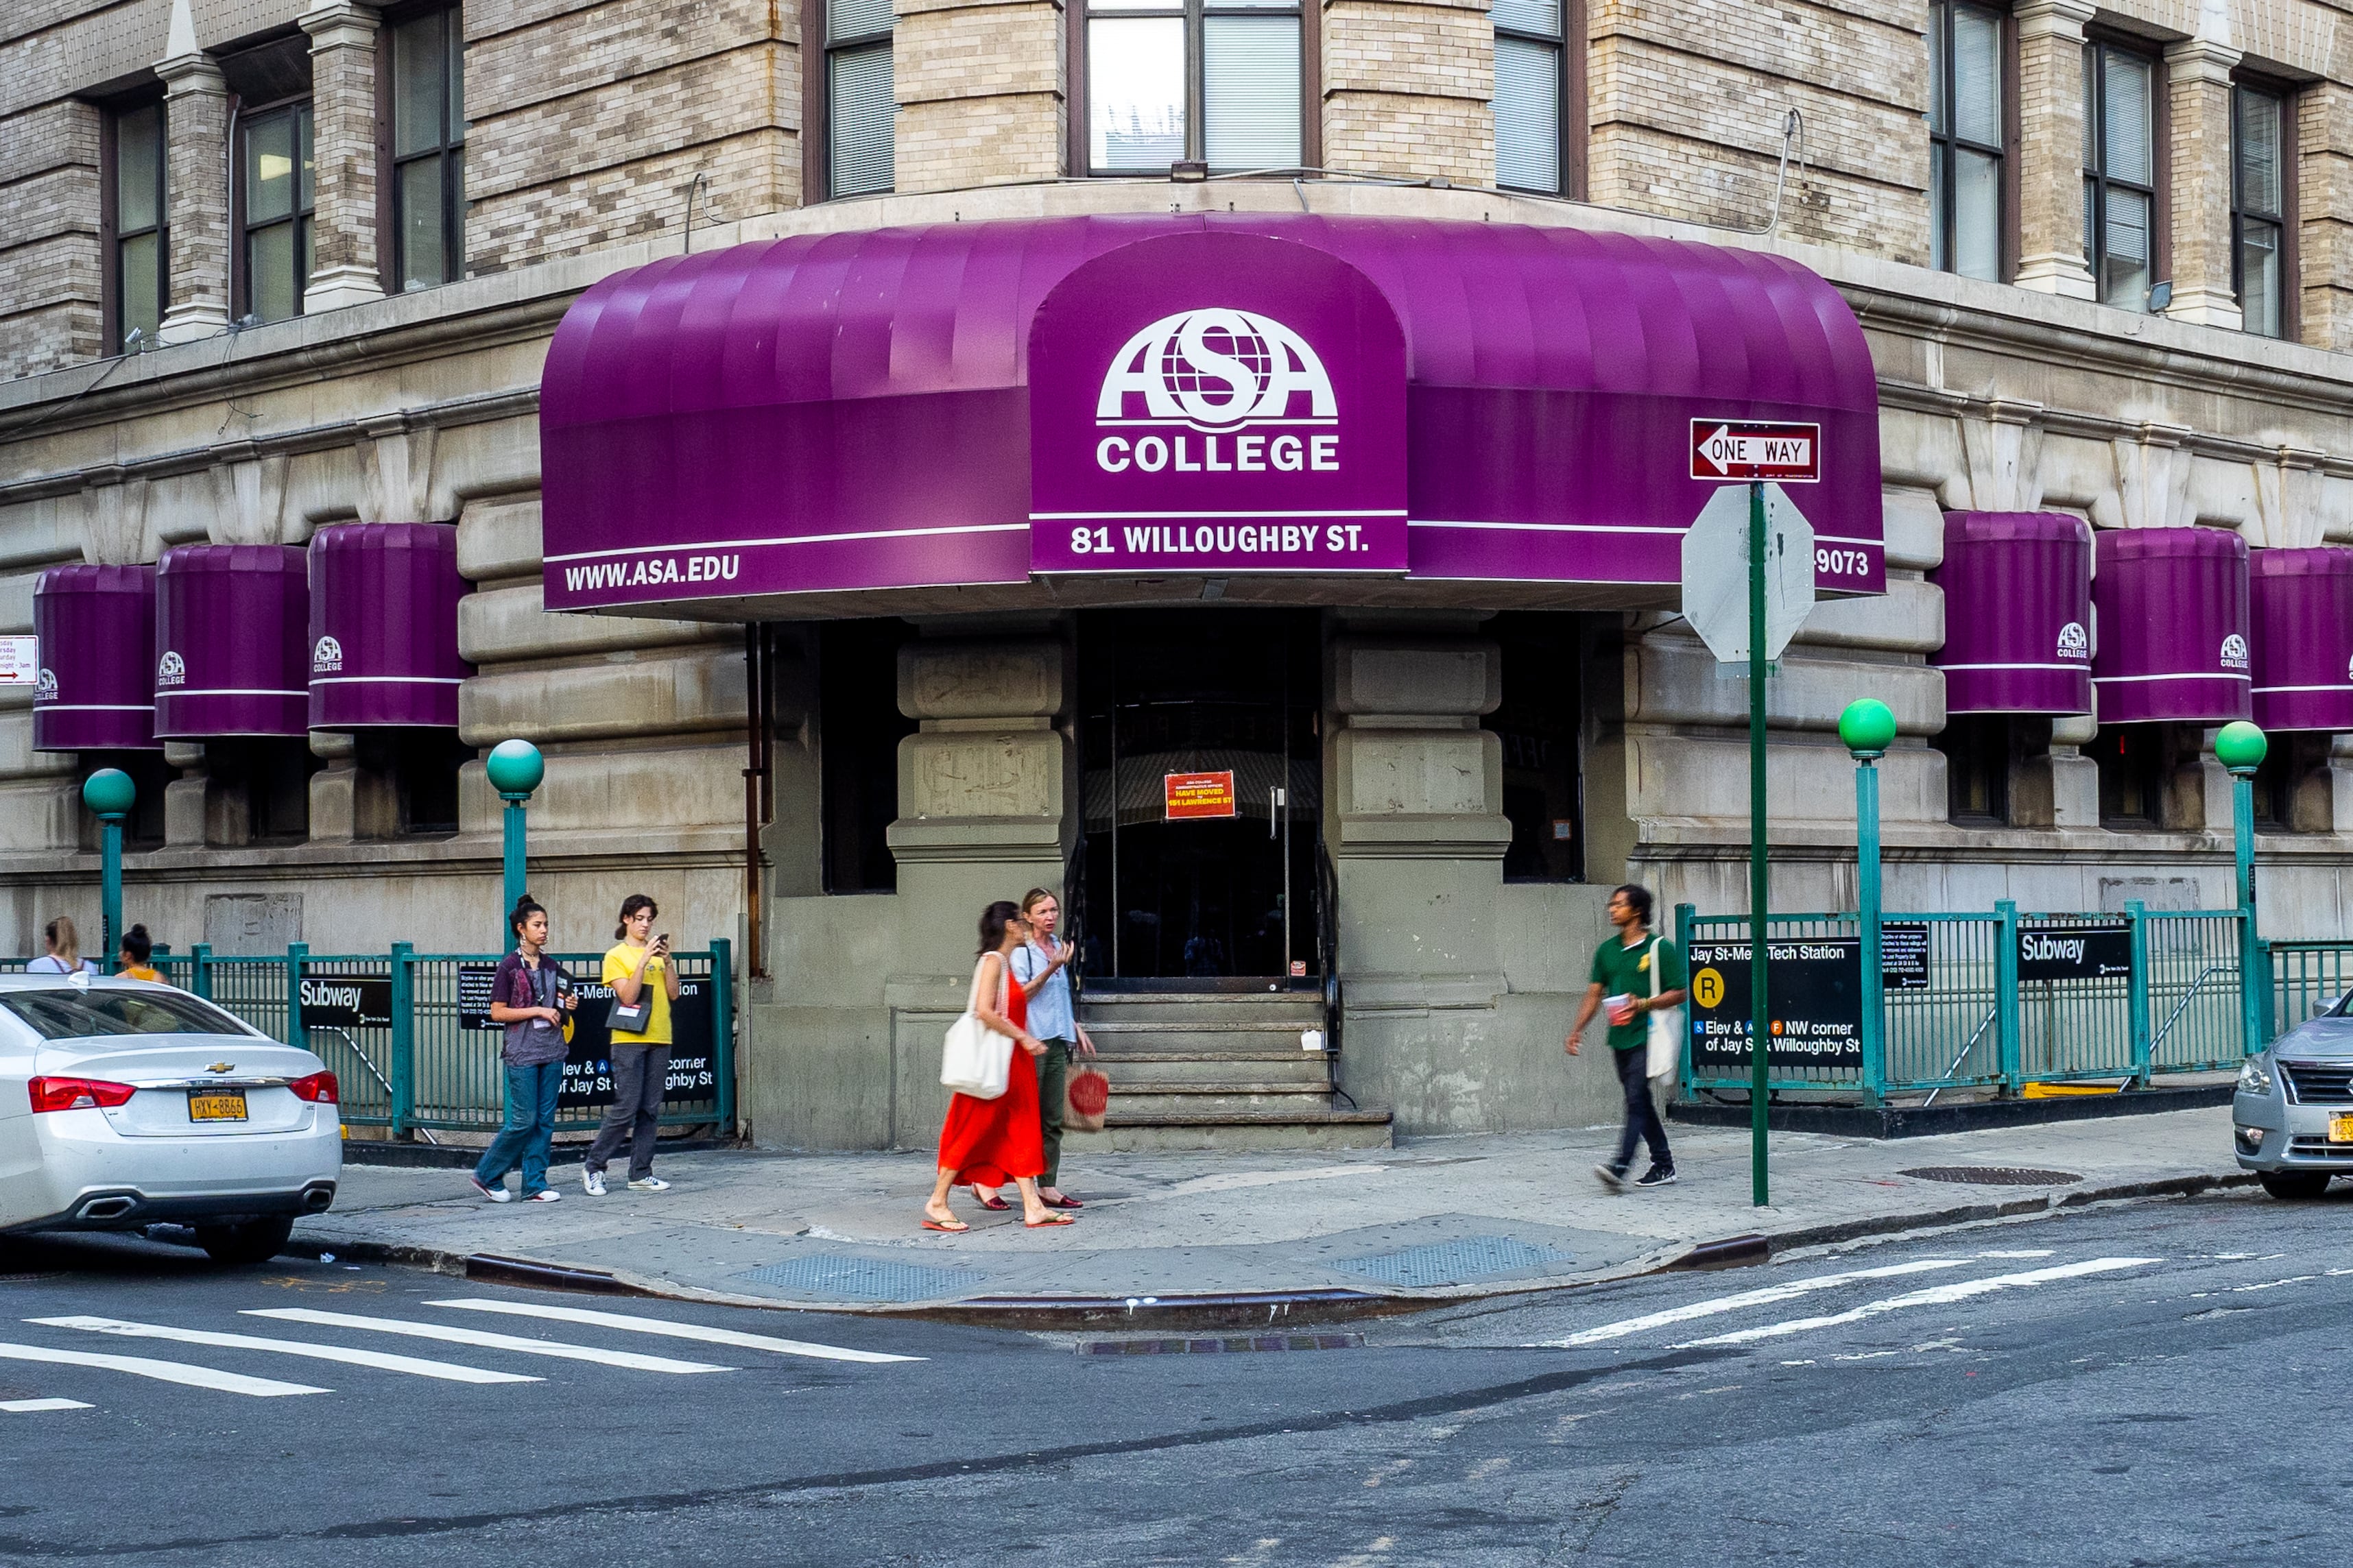 A building with purple sign for ASA college. 